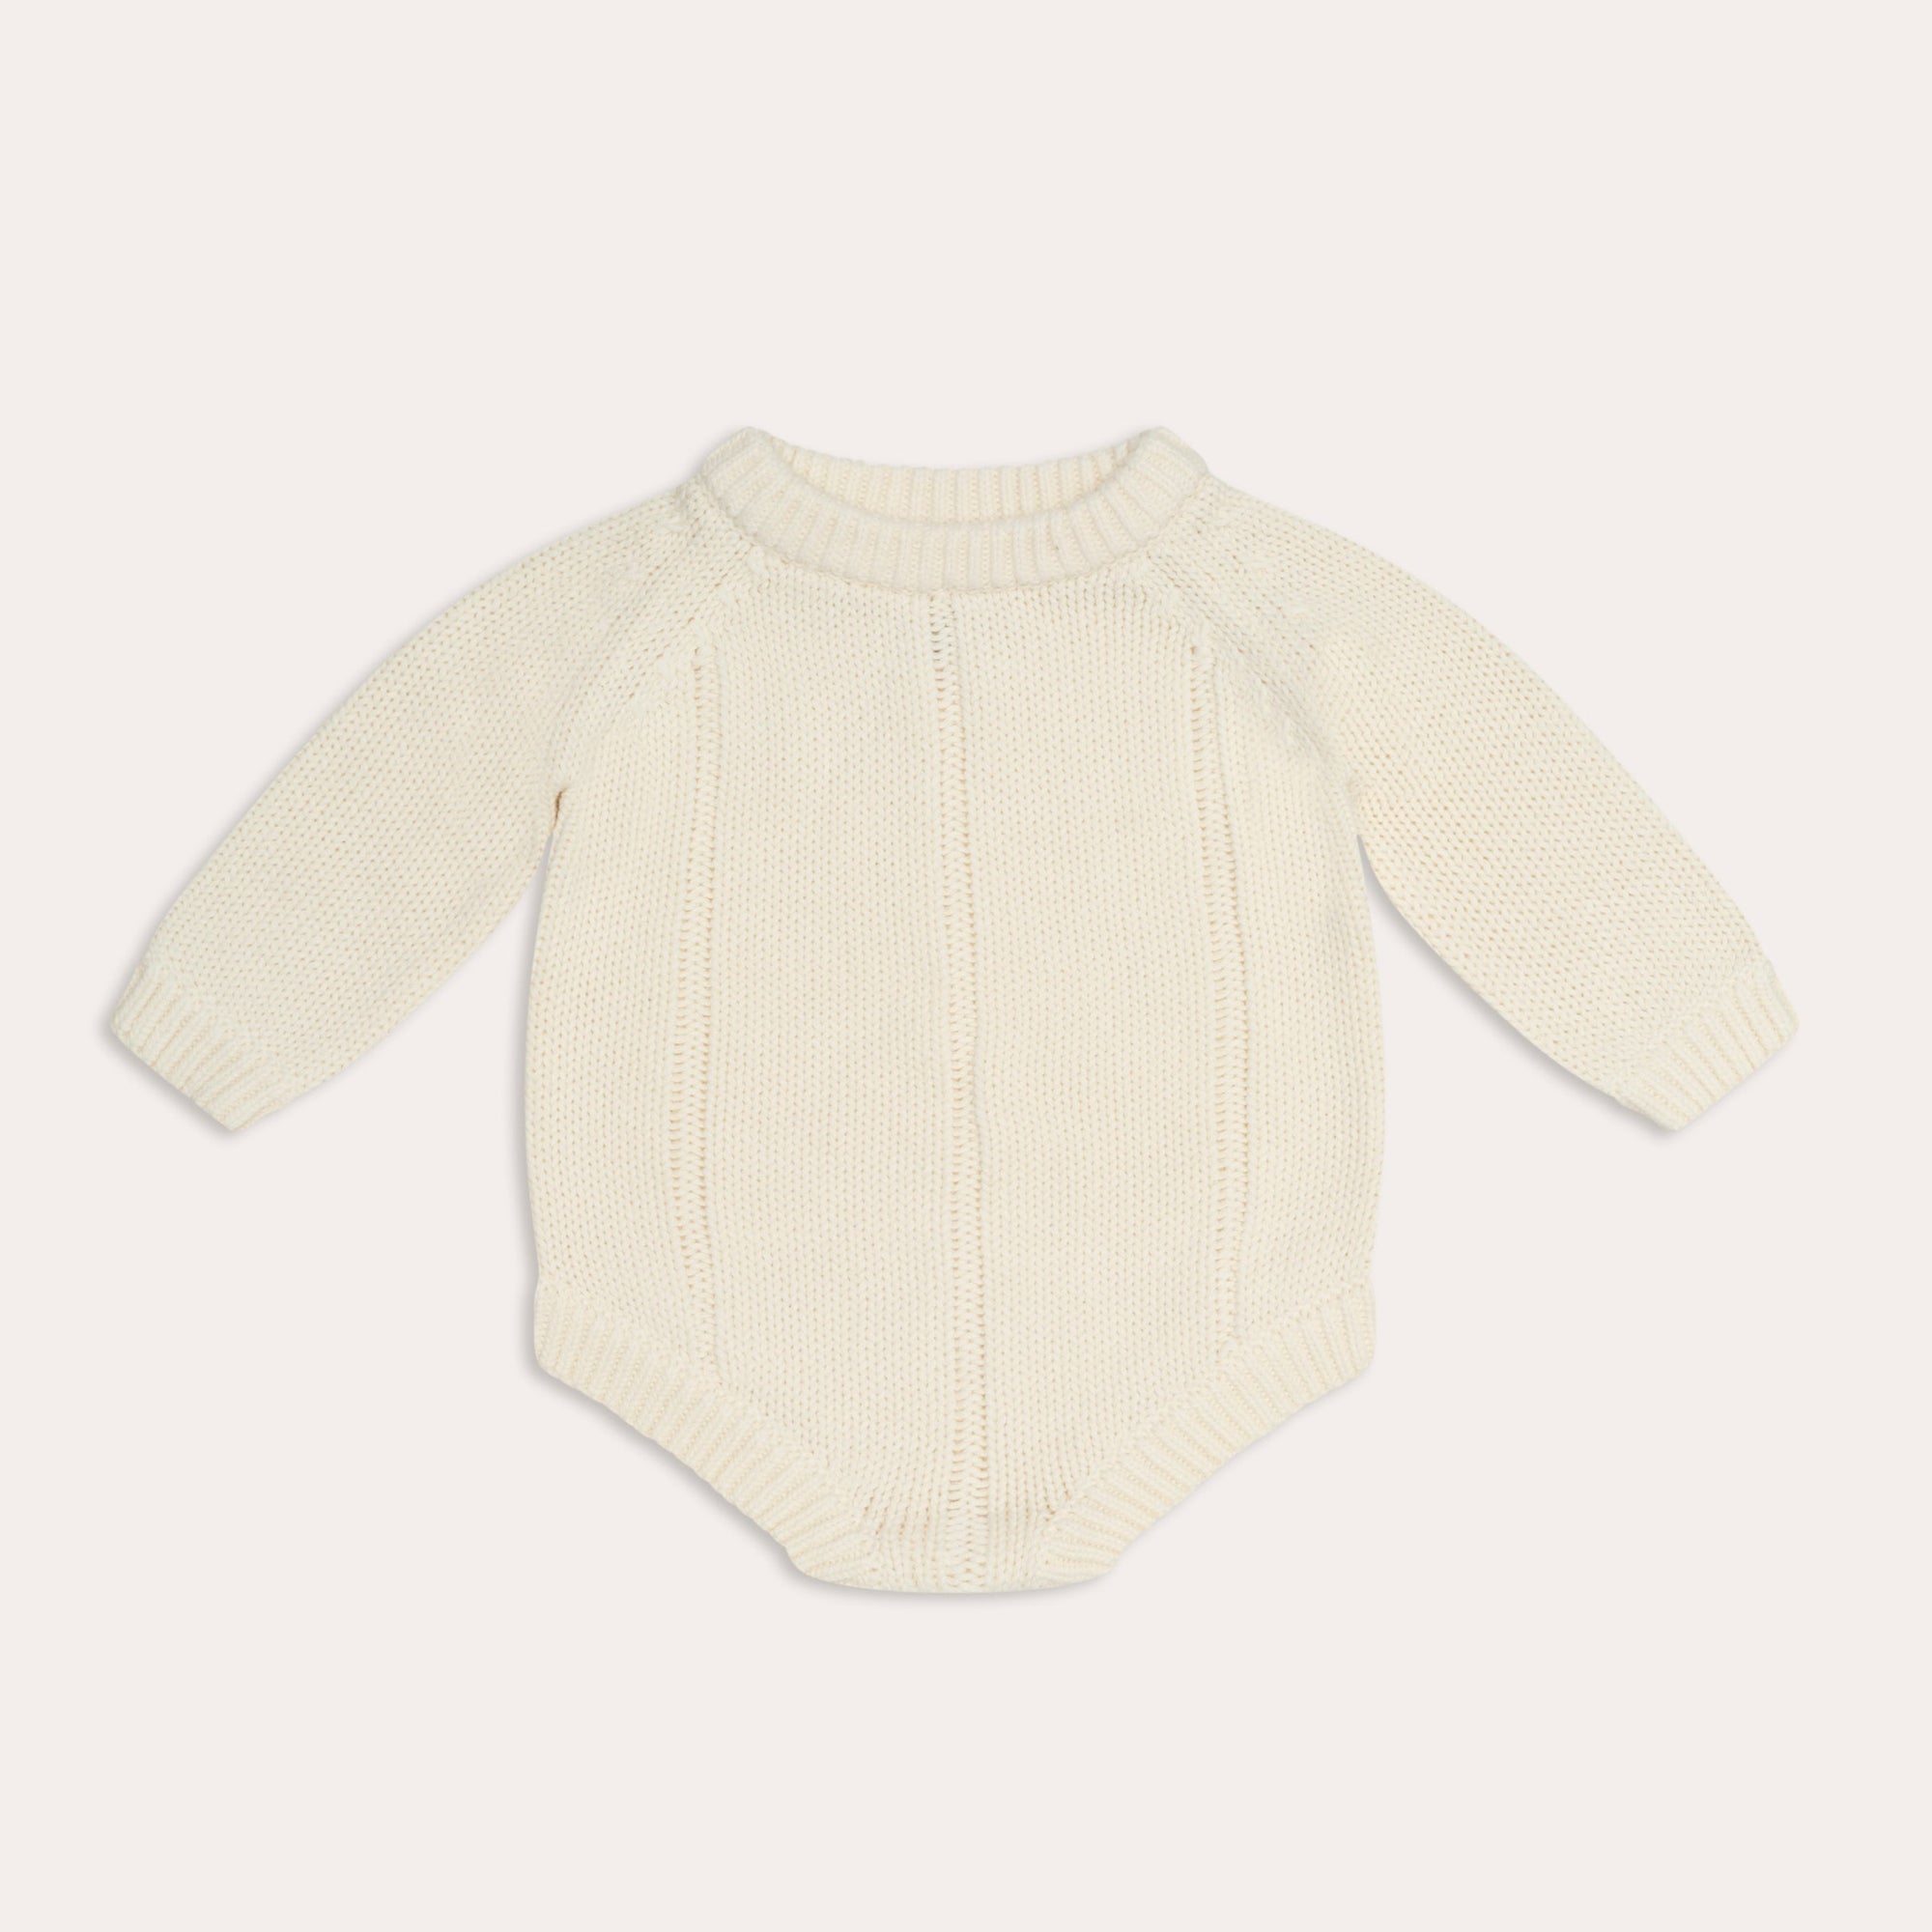 An illoura tallow knit romper | vanilla from Illoura the Label for a baby's knitted bodysuit in cream.